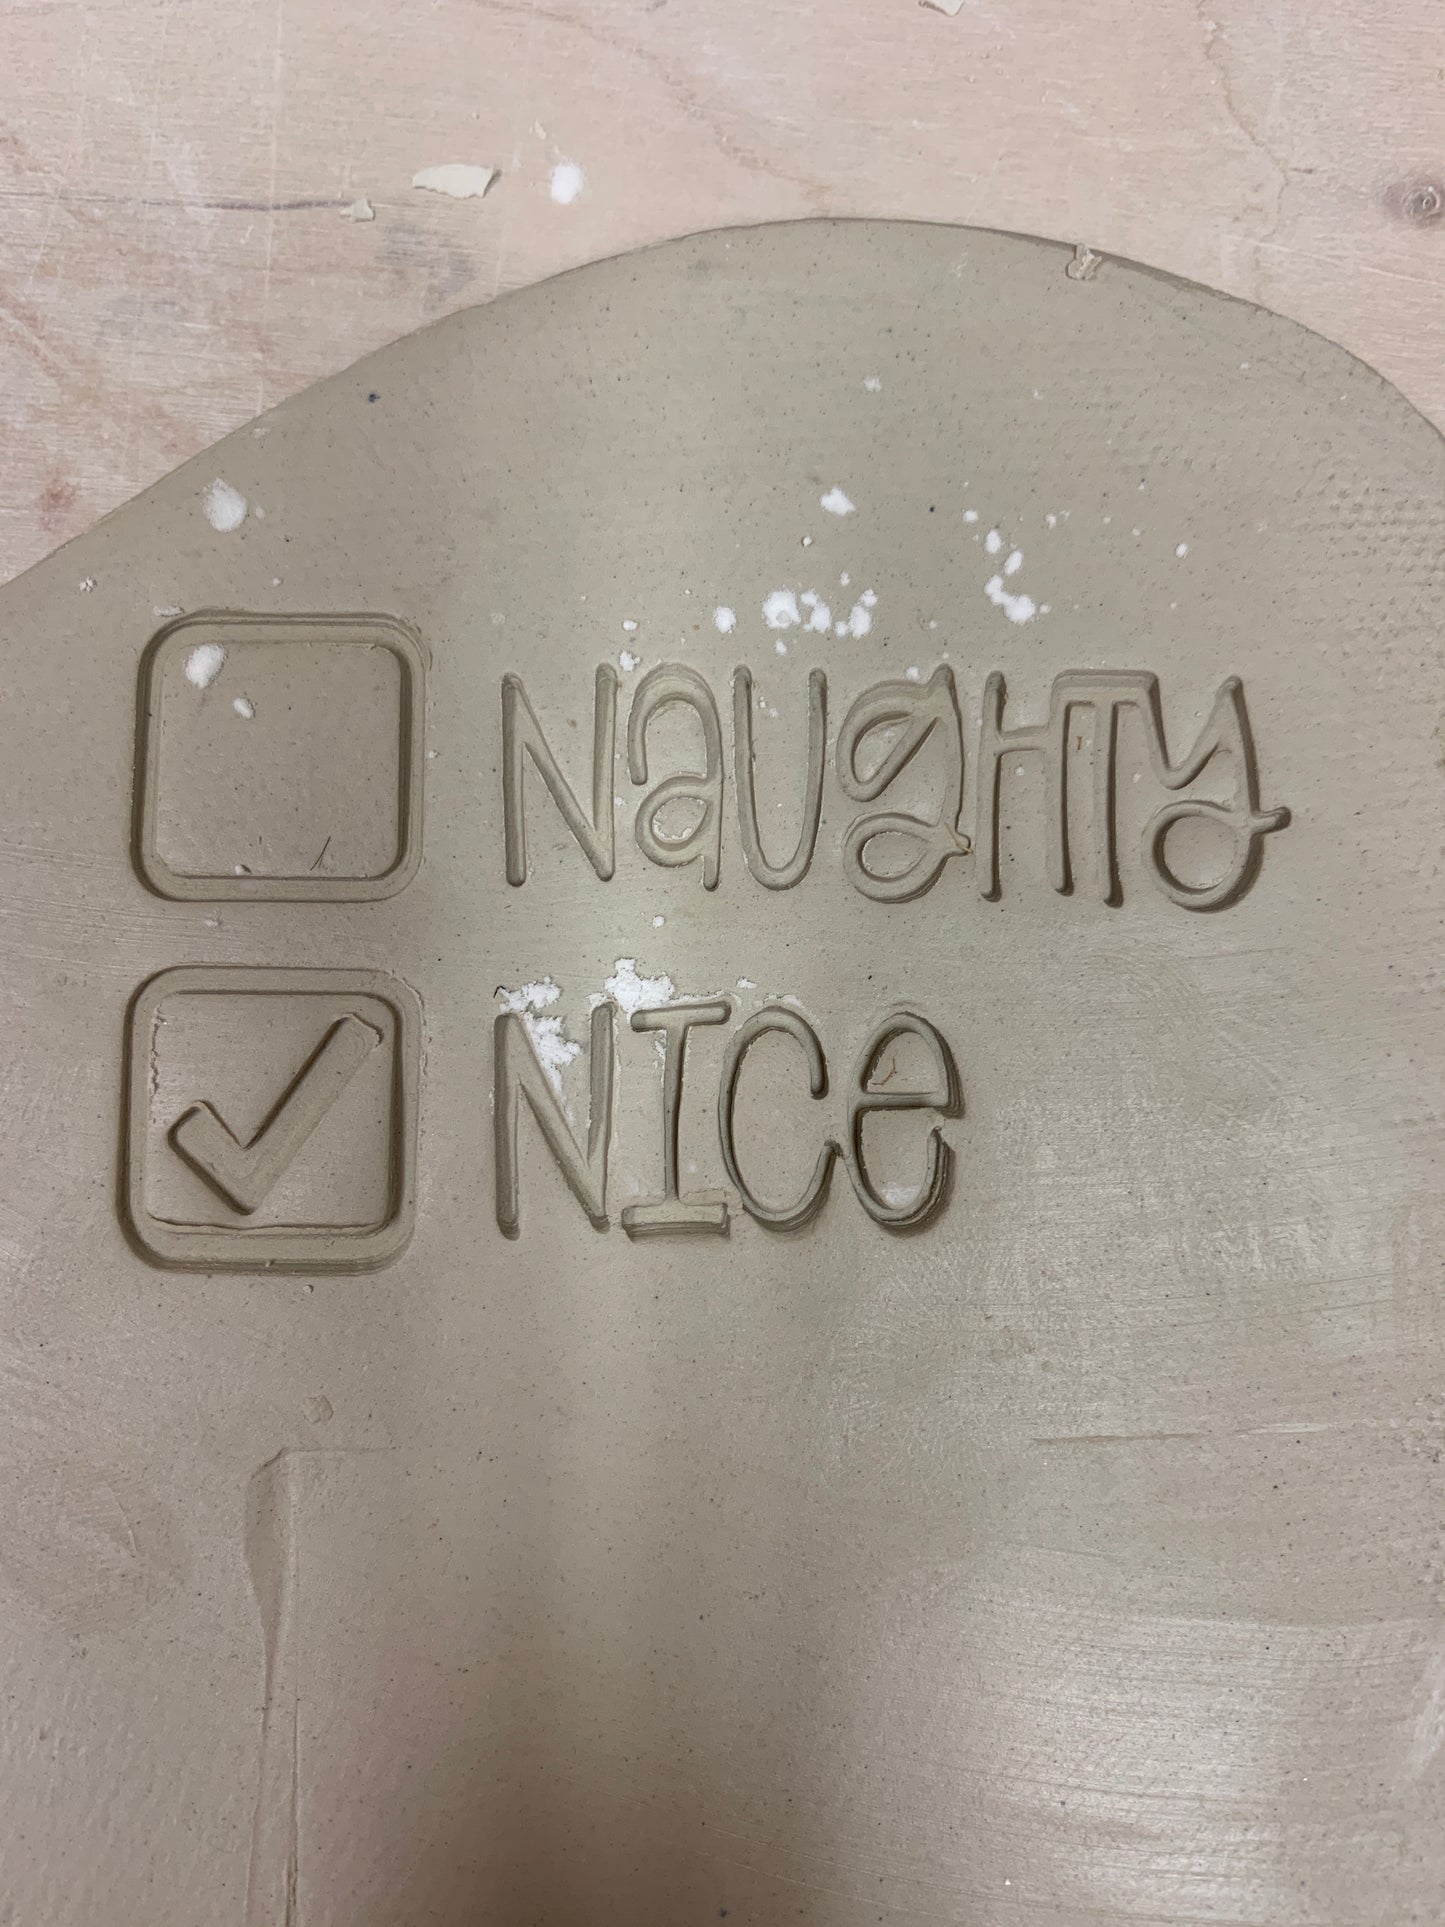 Christmas casual "Naughty/Nice" checklist word stamp - plastic 3D printed, multiple sizes